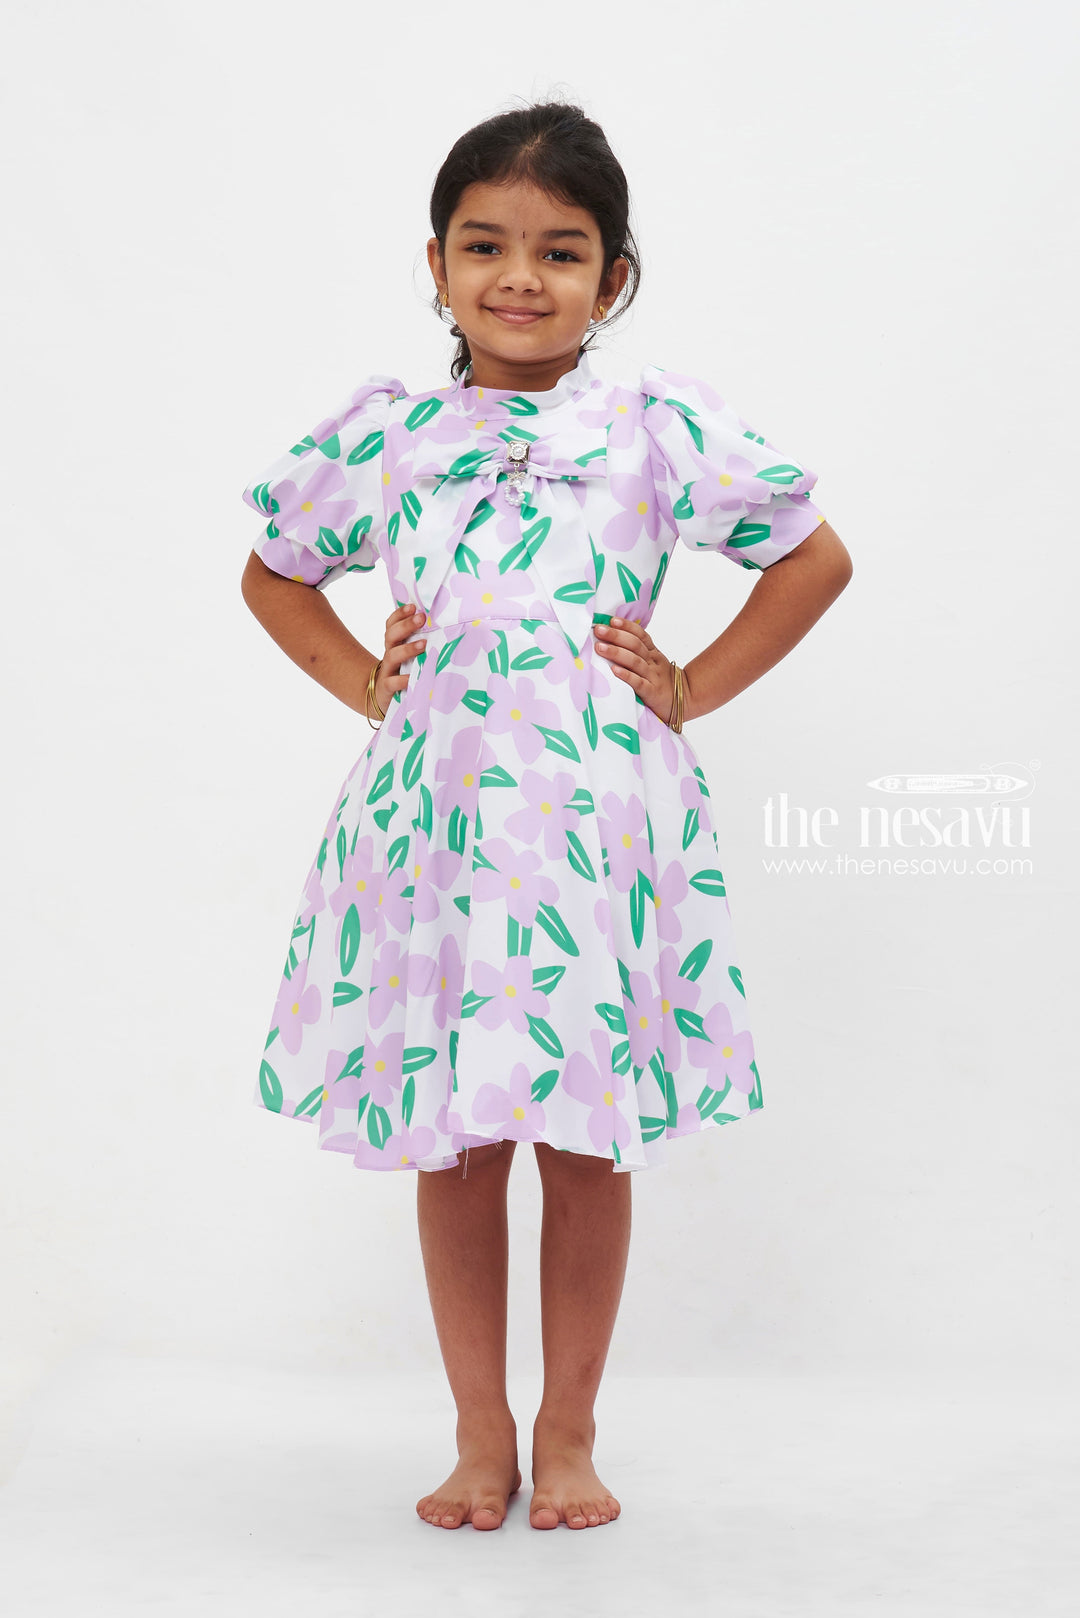 The Nesavu Girls Fancy Frock Purple Blossom Frock with Sparkling Brooch for Girls Nesavu 16 (1Y) / Purple GFC1186C-16 Girls Lavender Floral Frock | Cheerful Spring Dress with Brooch | The Nesavu